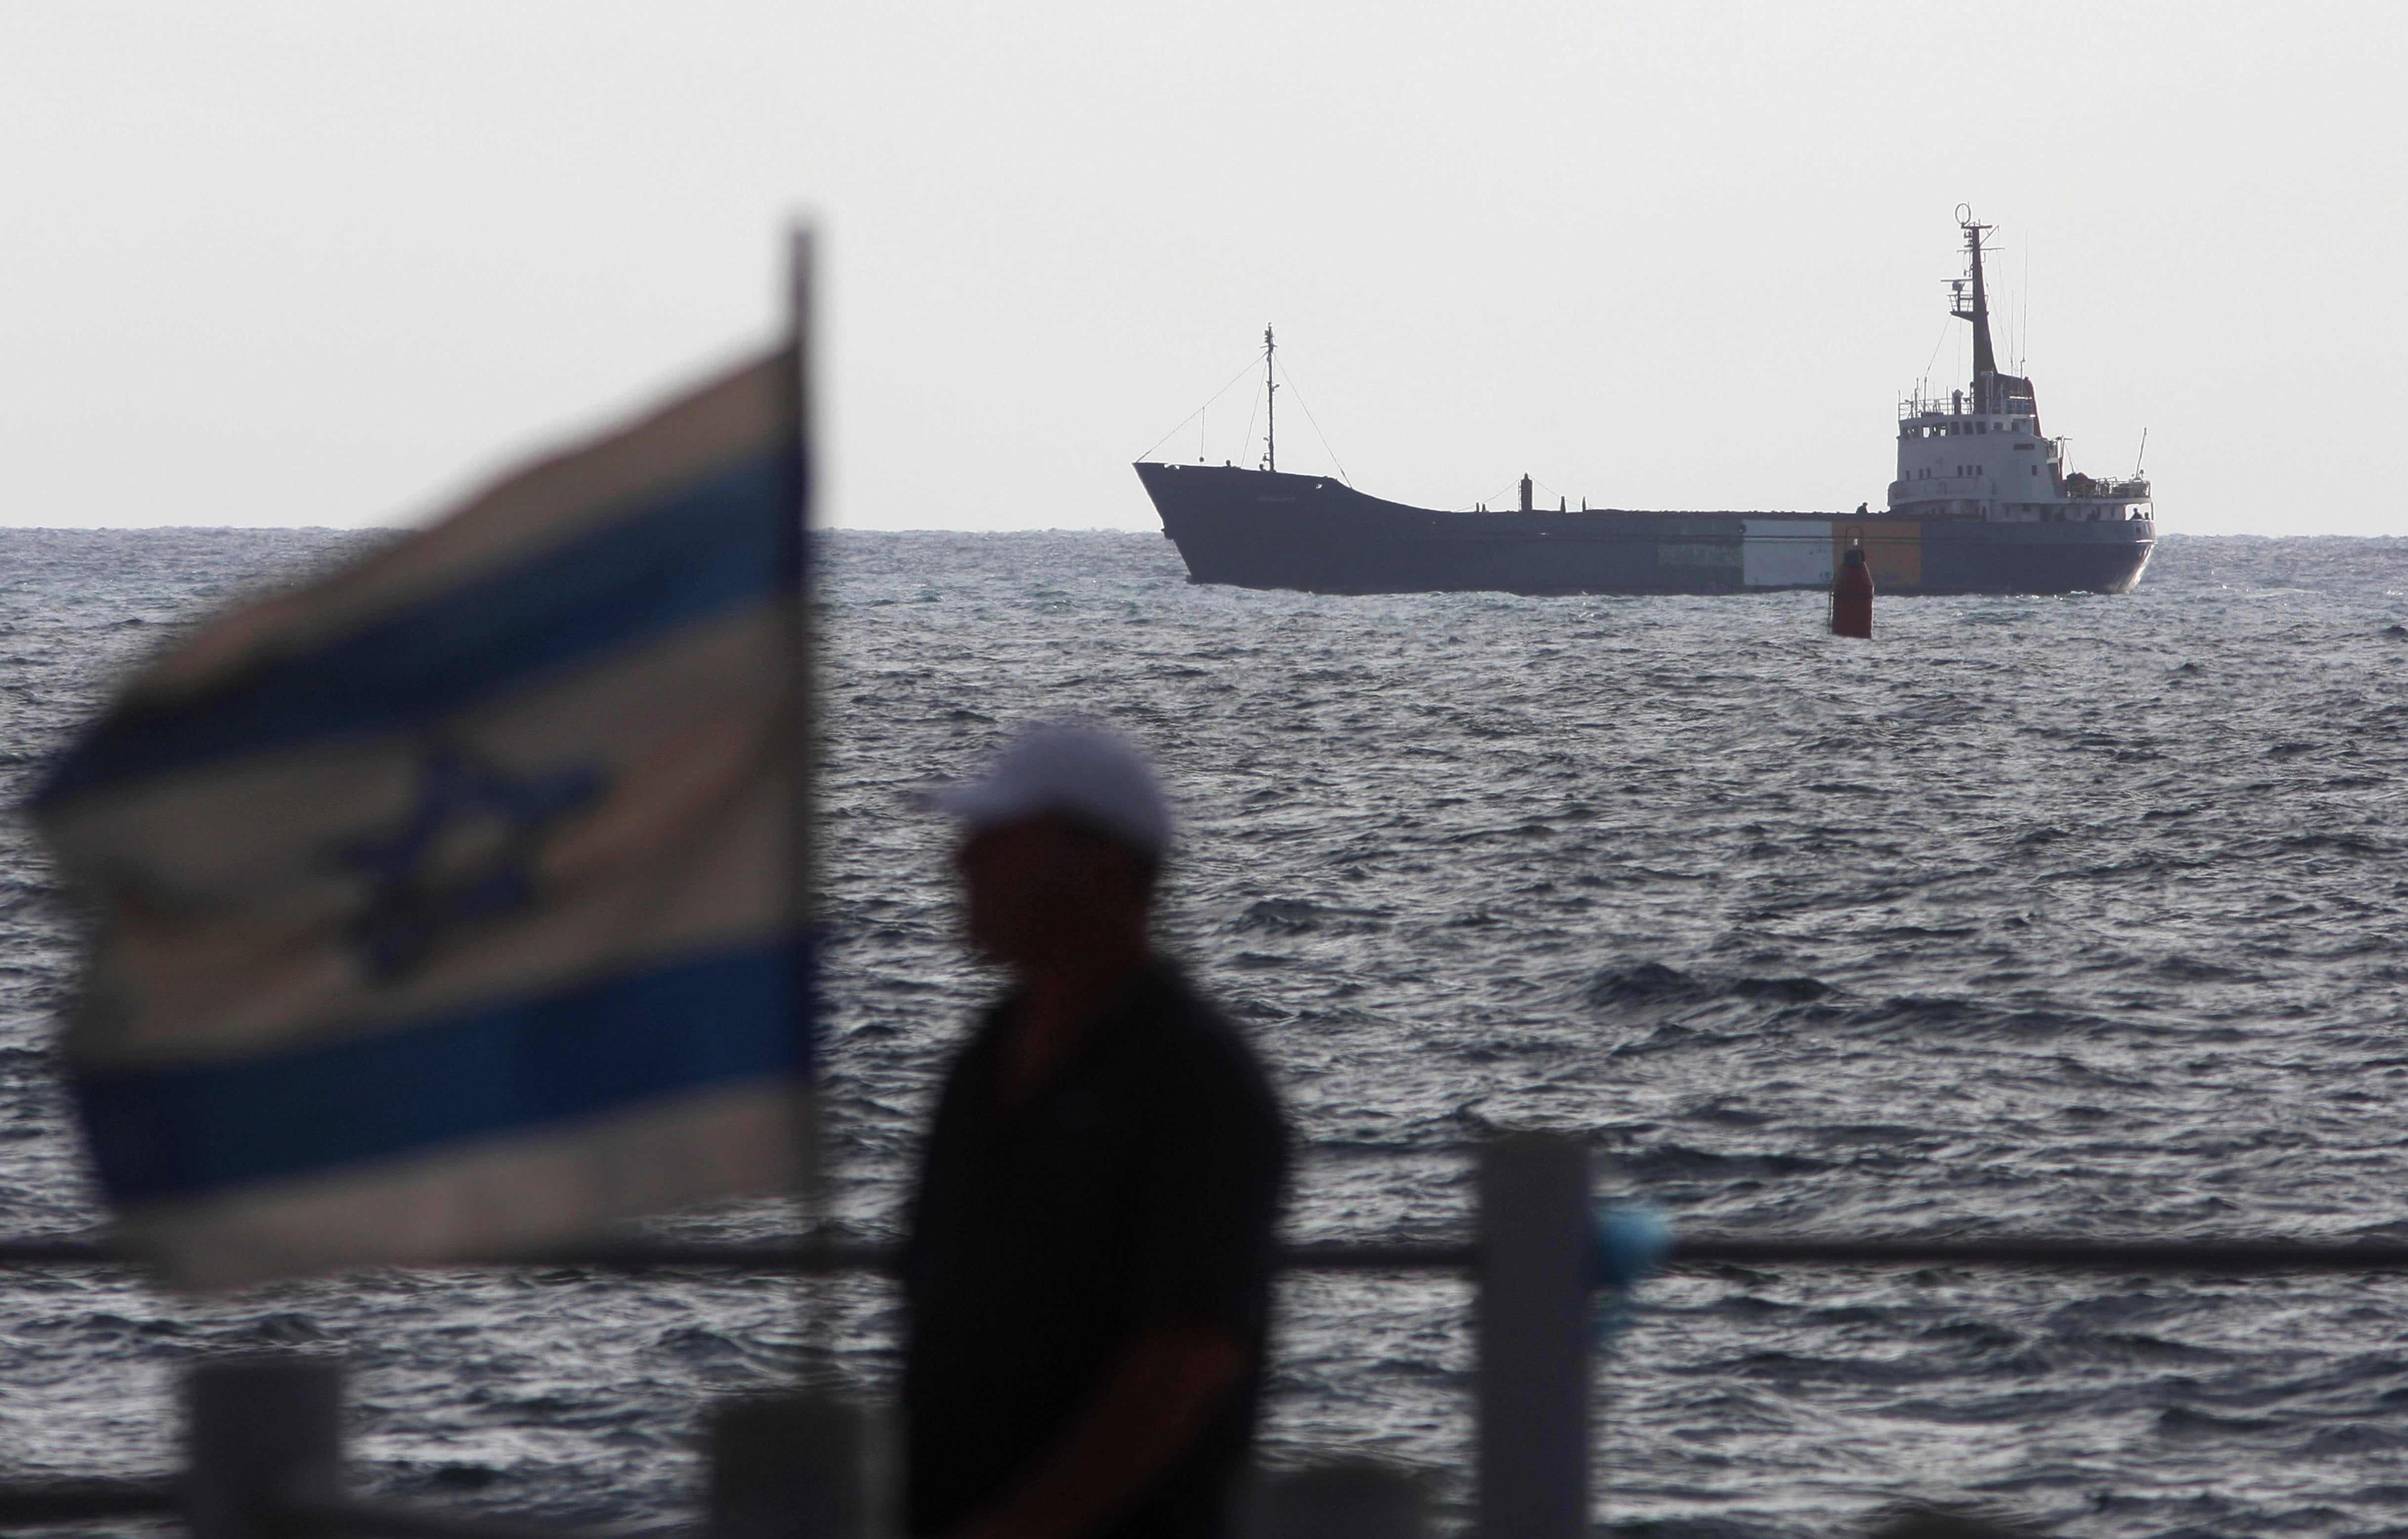 Concerns have mounted over attacks targeting Israeli-owned ships in the Gulf waters